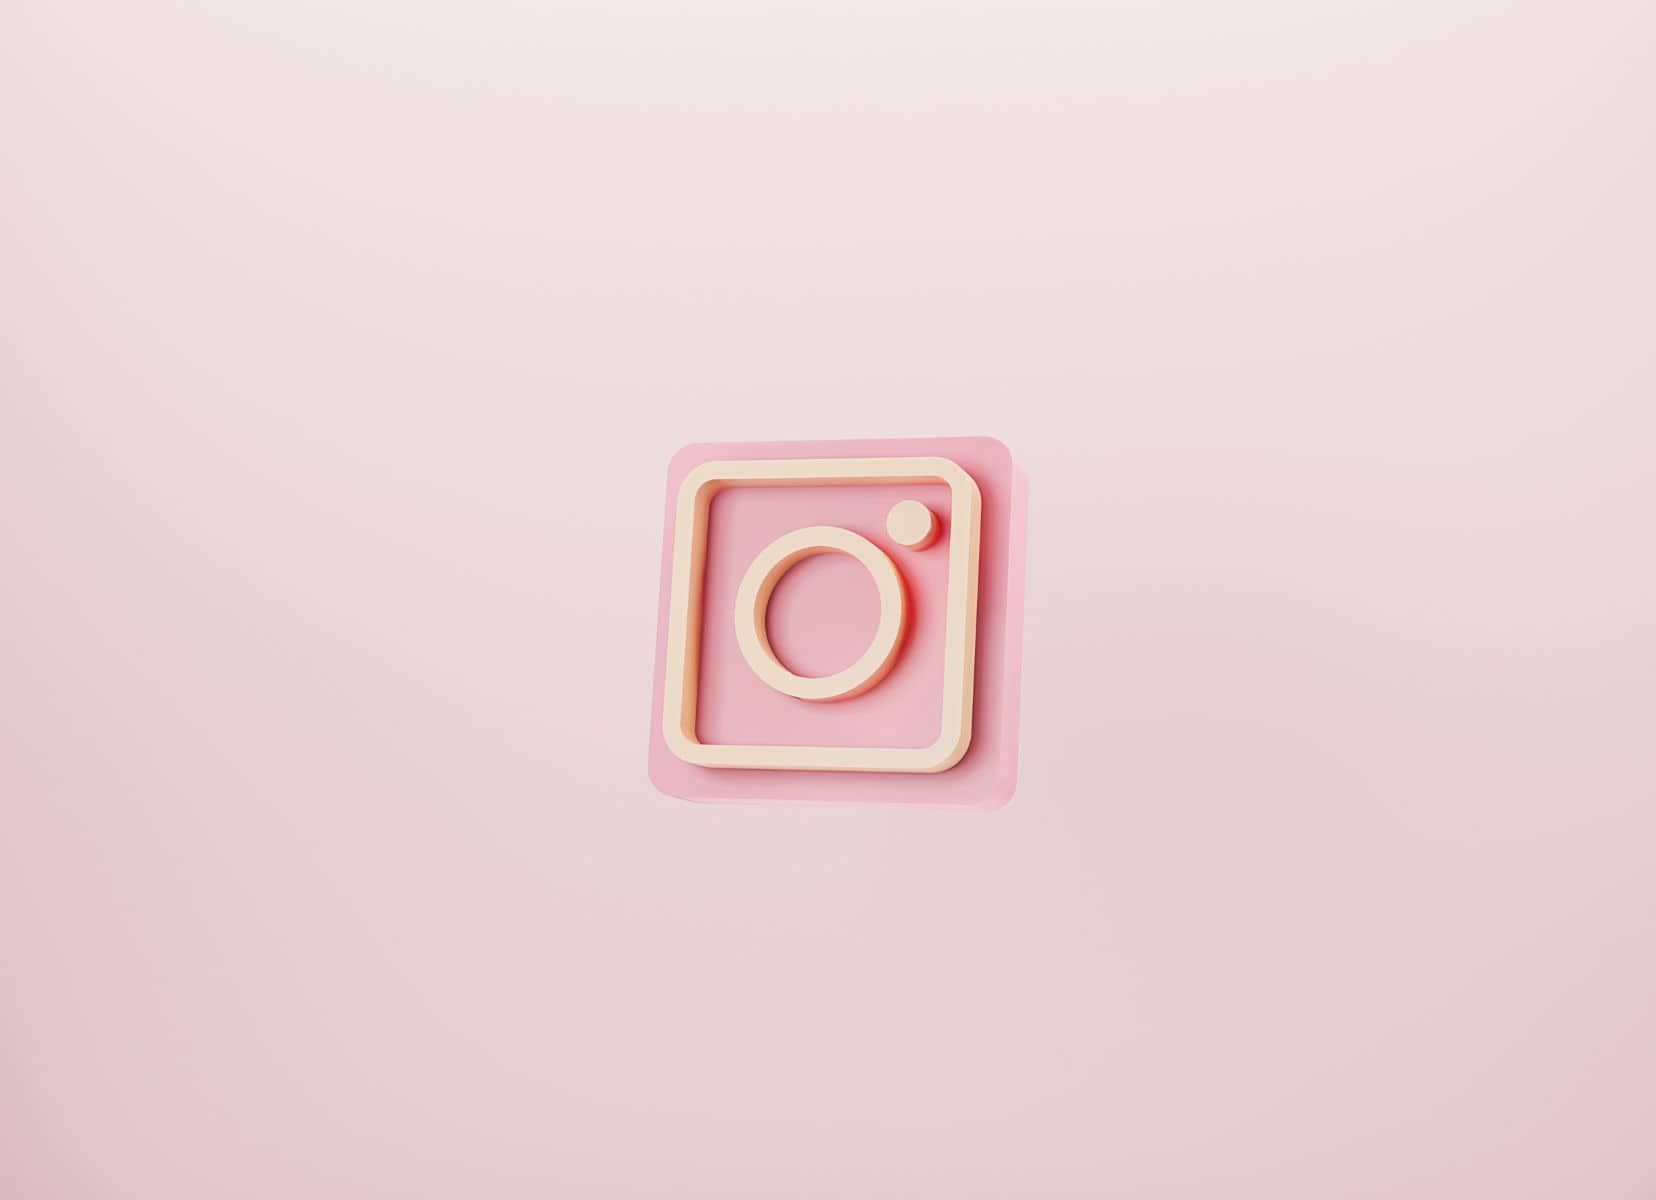 Travel couple captions for Instagram - pink background with pink instagram logo